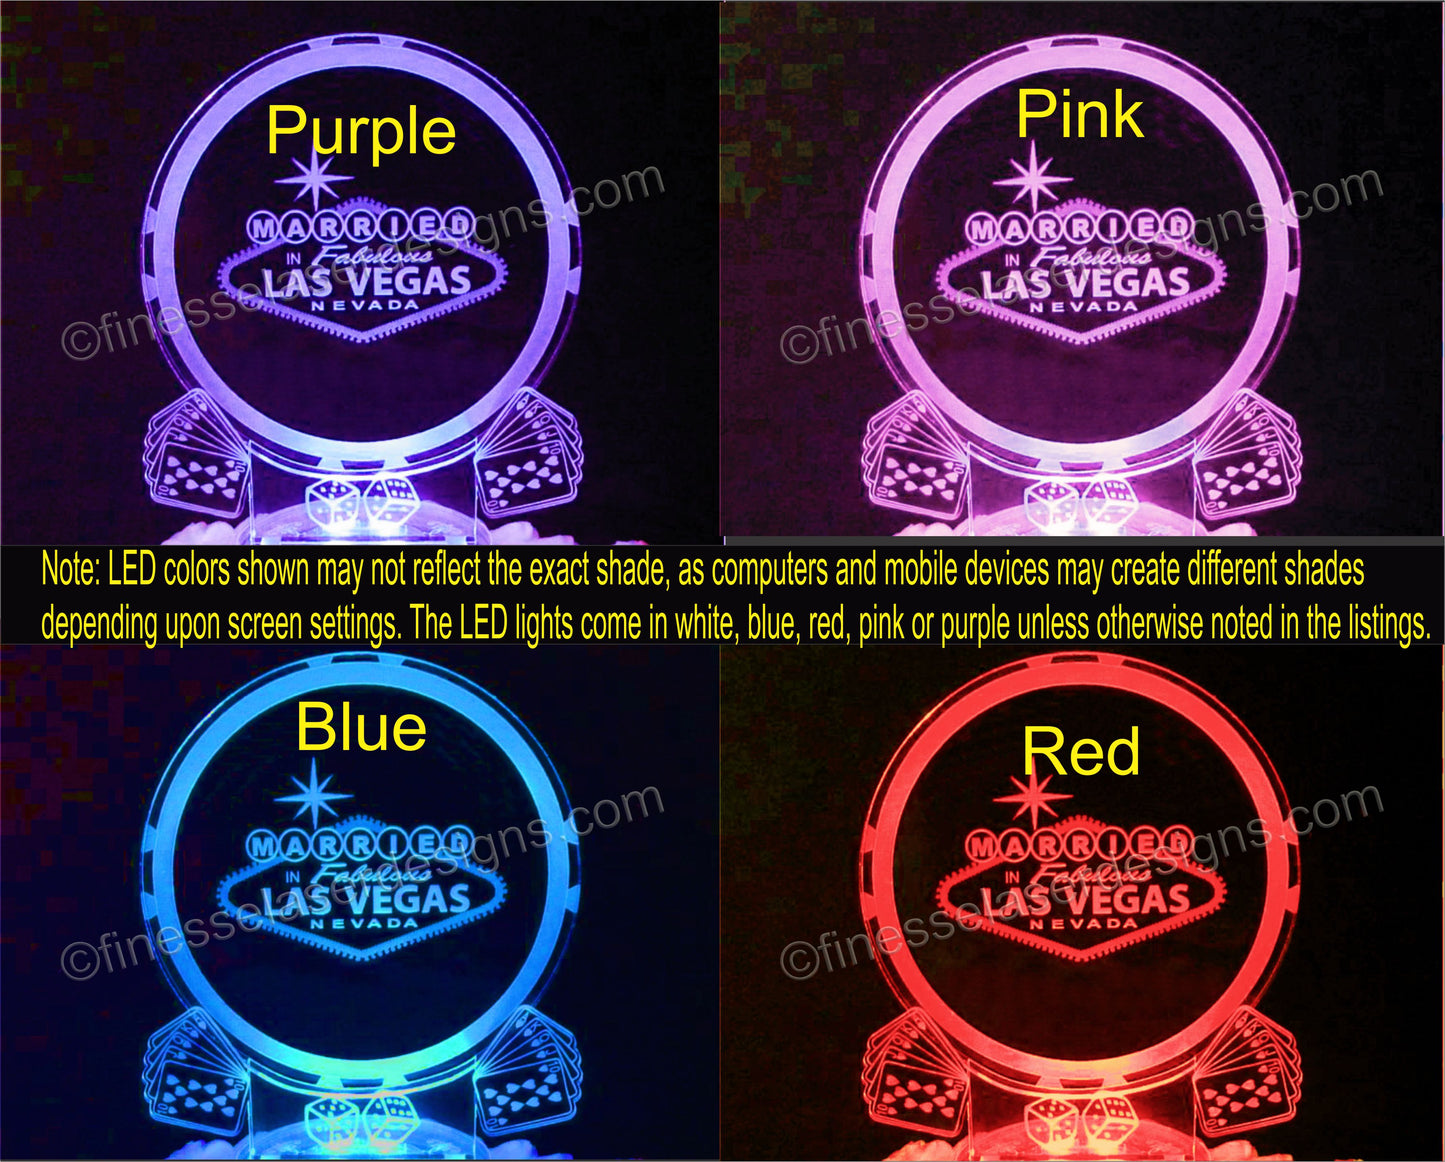 Colored views of acrylic round cake topper with a Las Vegas theme showing pink, purple, blue, and red lighted views